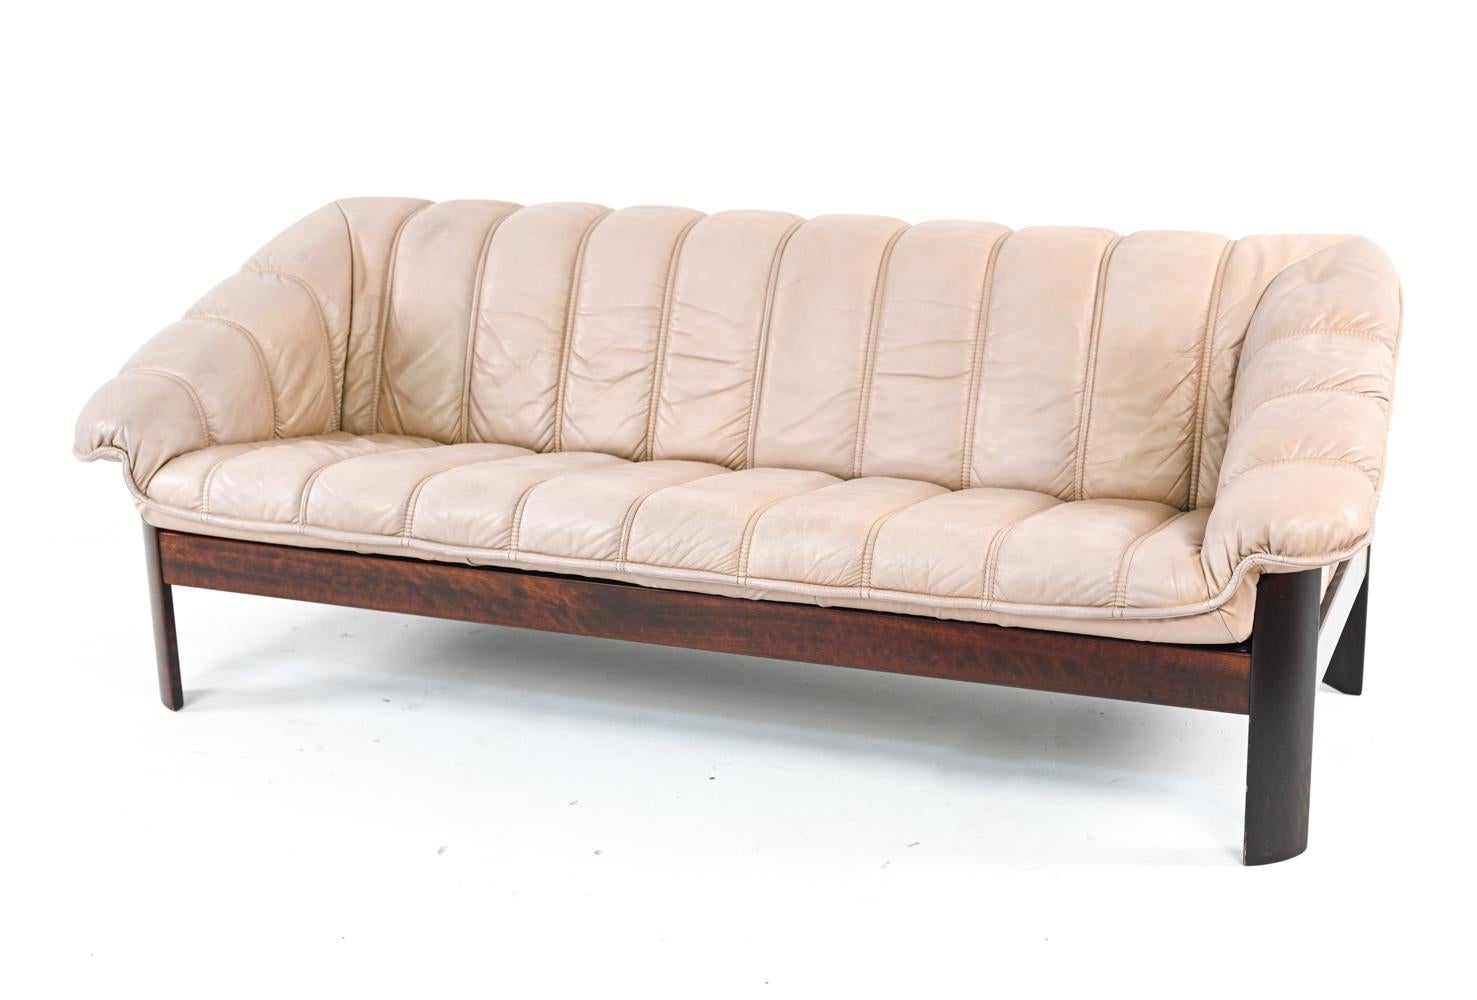 Ekorness Norway Mid-Century Sofa & Loveseat in Taupe Leather For Sale 5